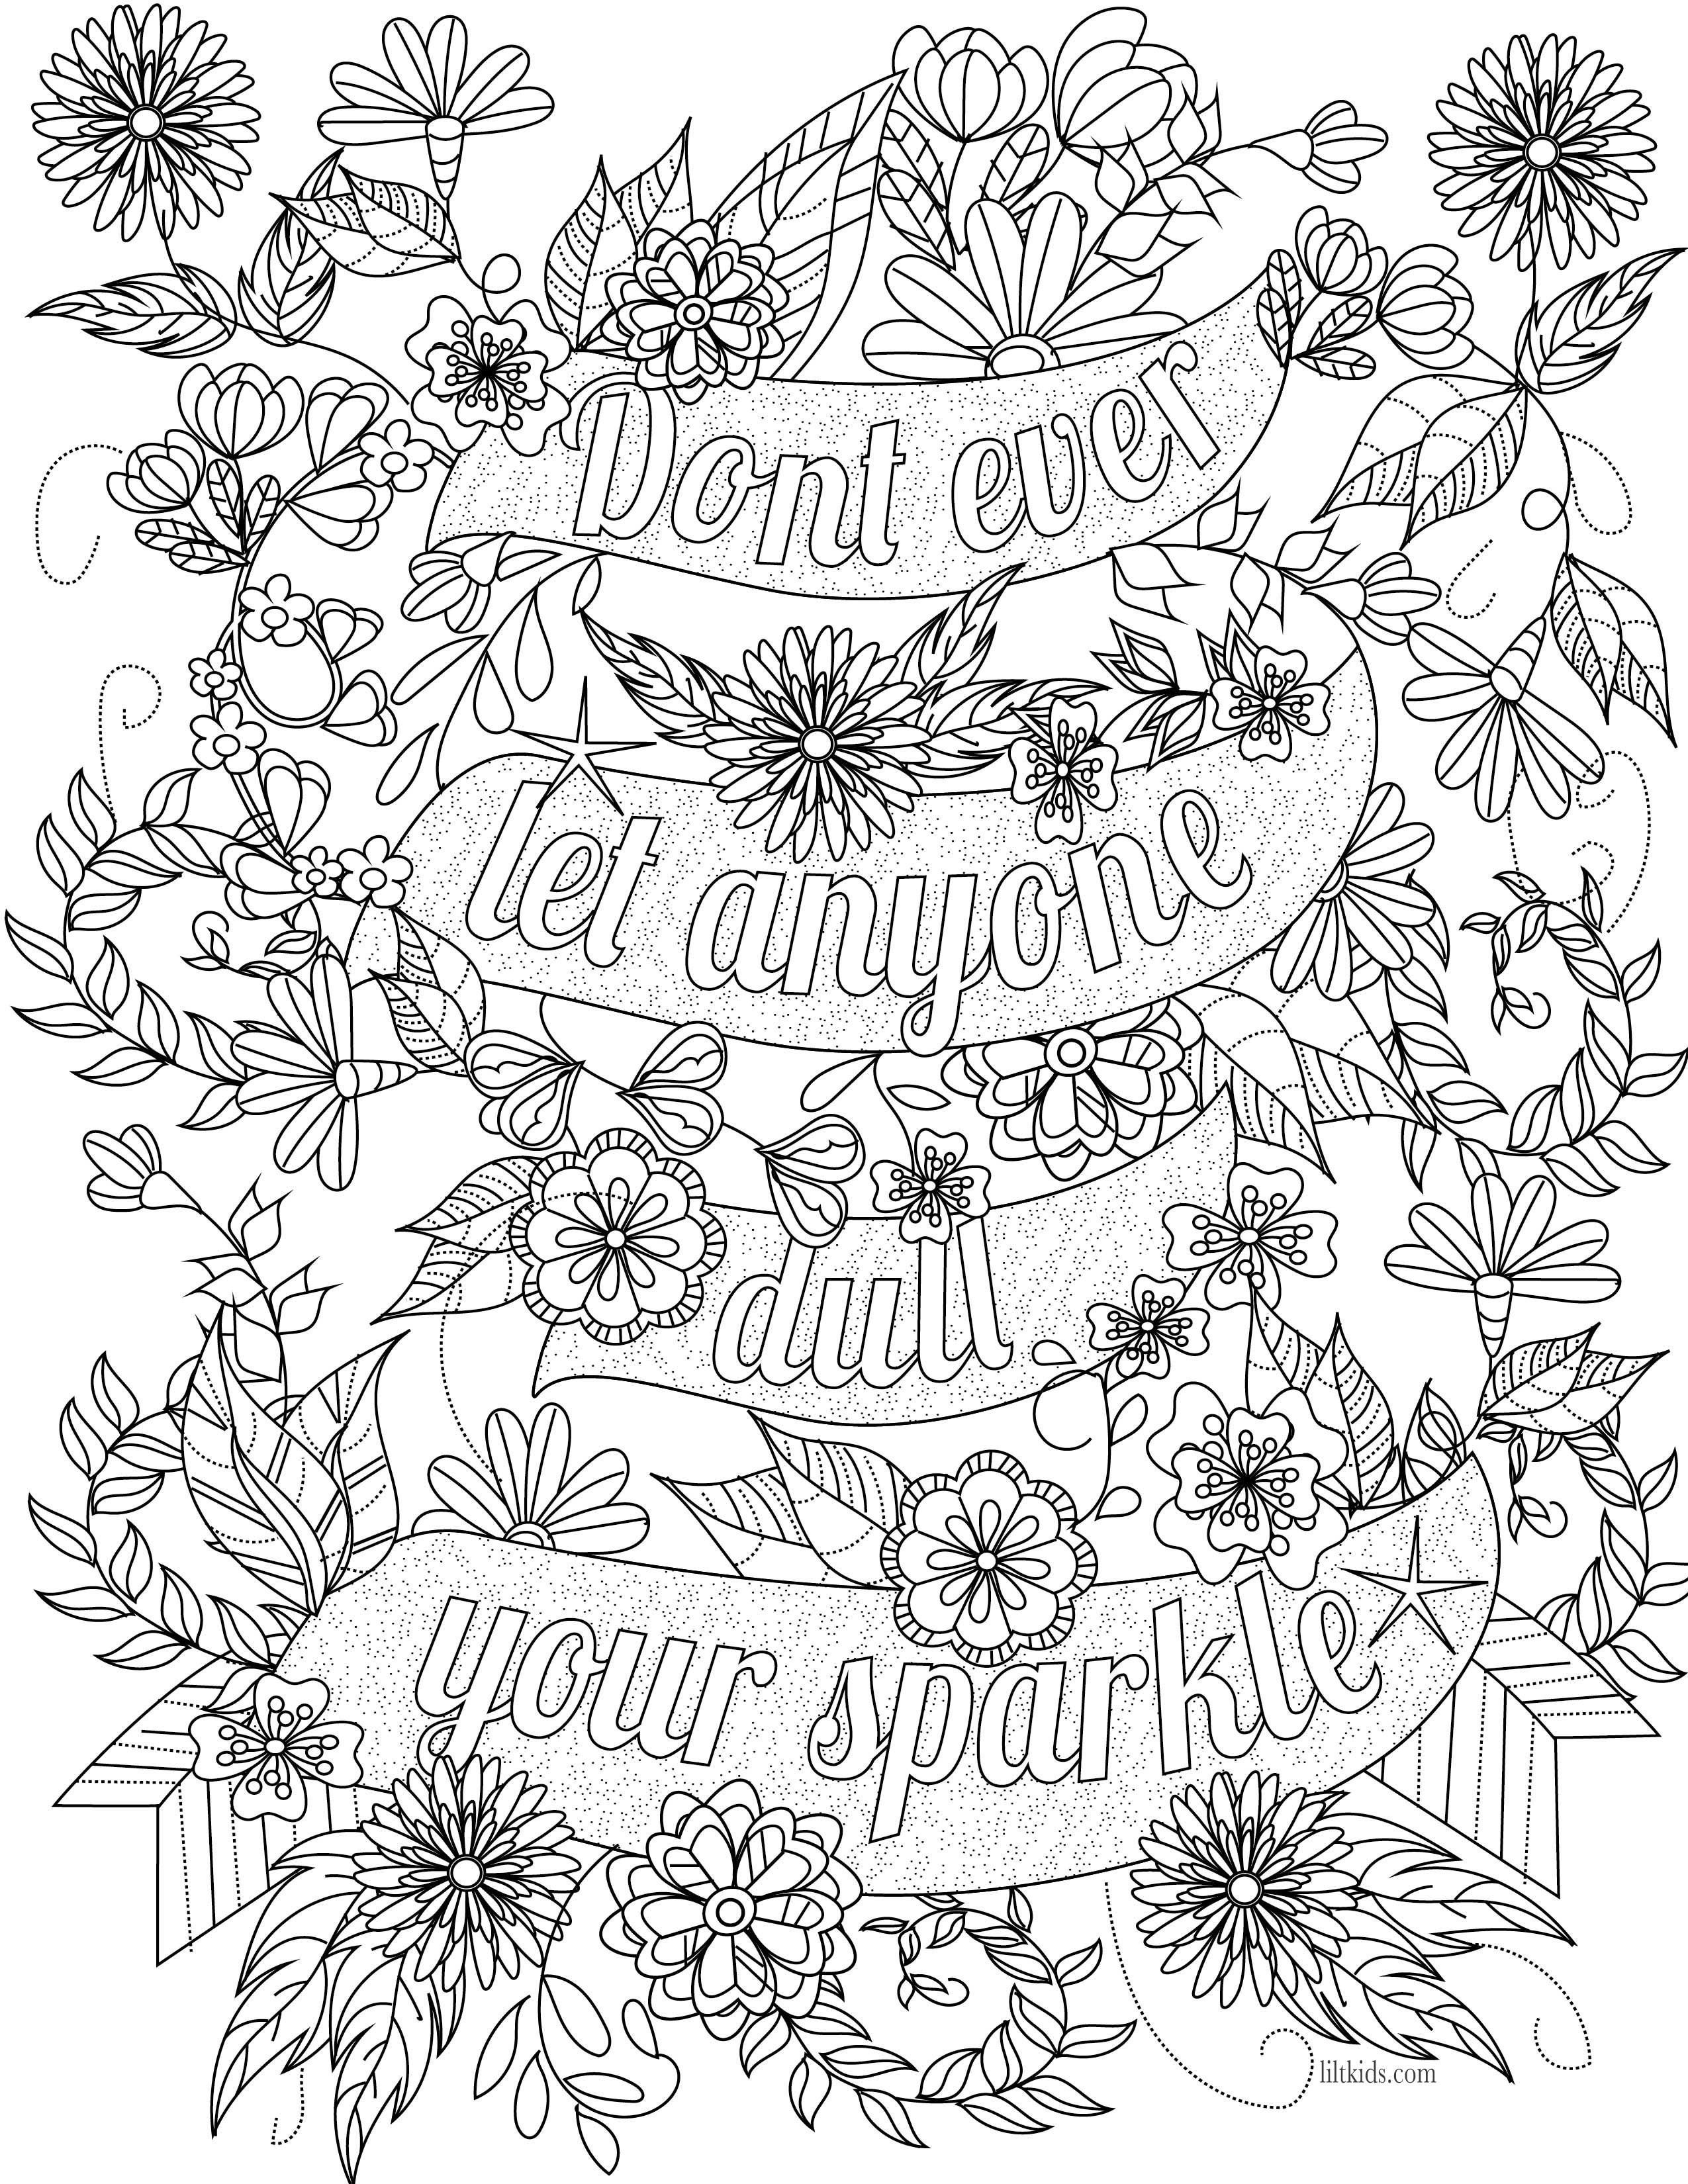 Free Inspirational Quote Adult Coloring Book Image From Liltkids - Free Printable Quote Coloring Pages For Adults